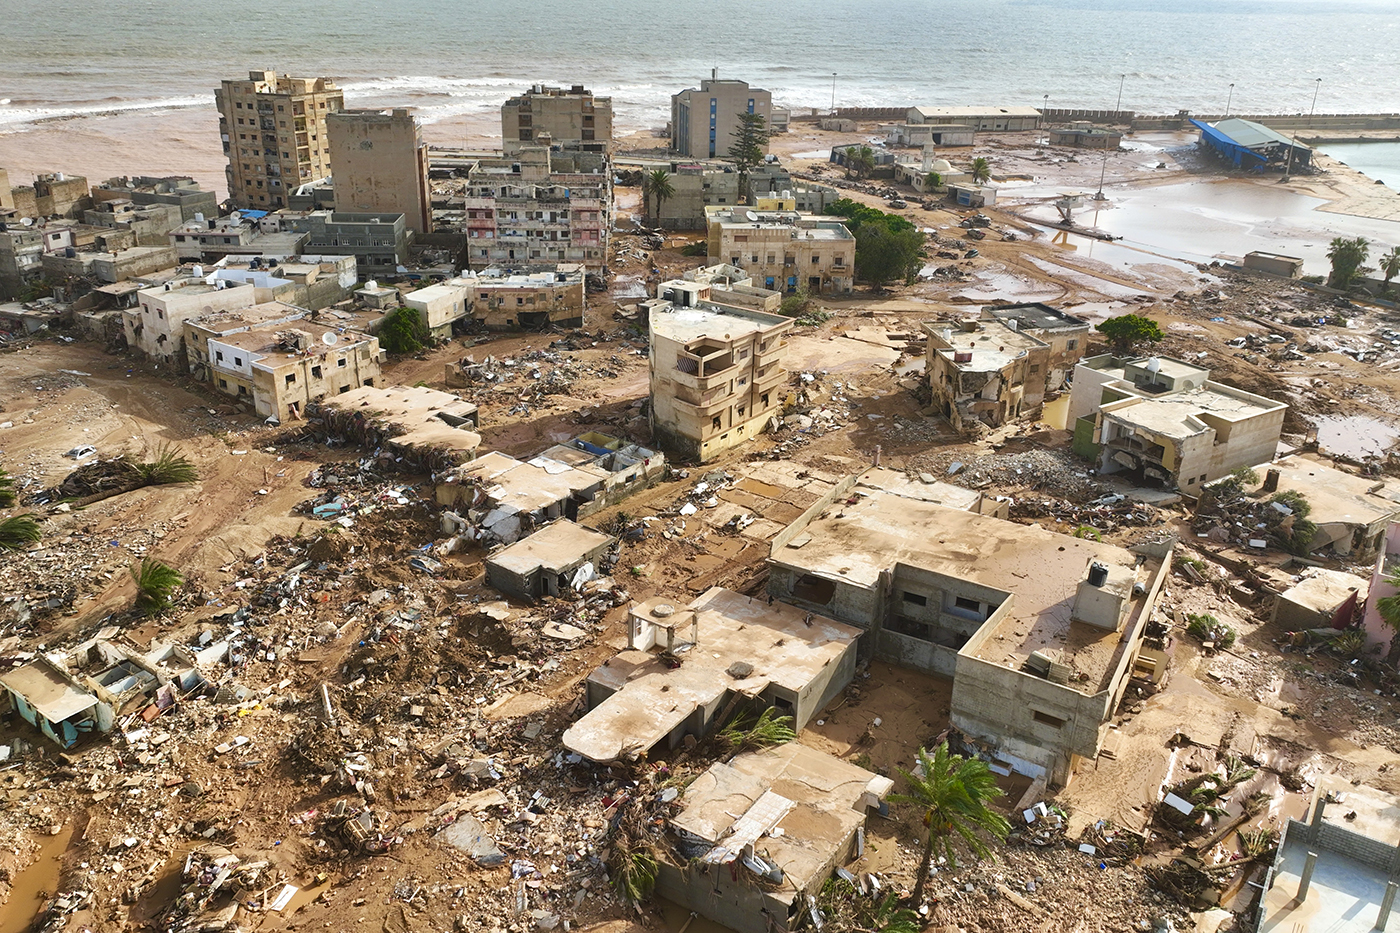 An overhead shot of Derna in the aftermath of the devastating floods.